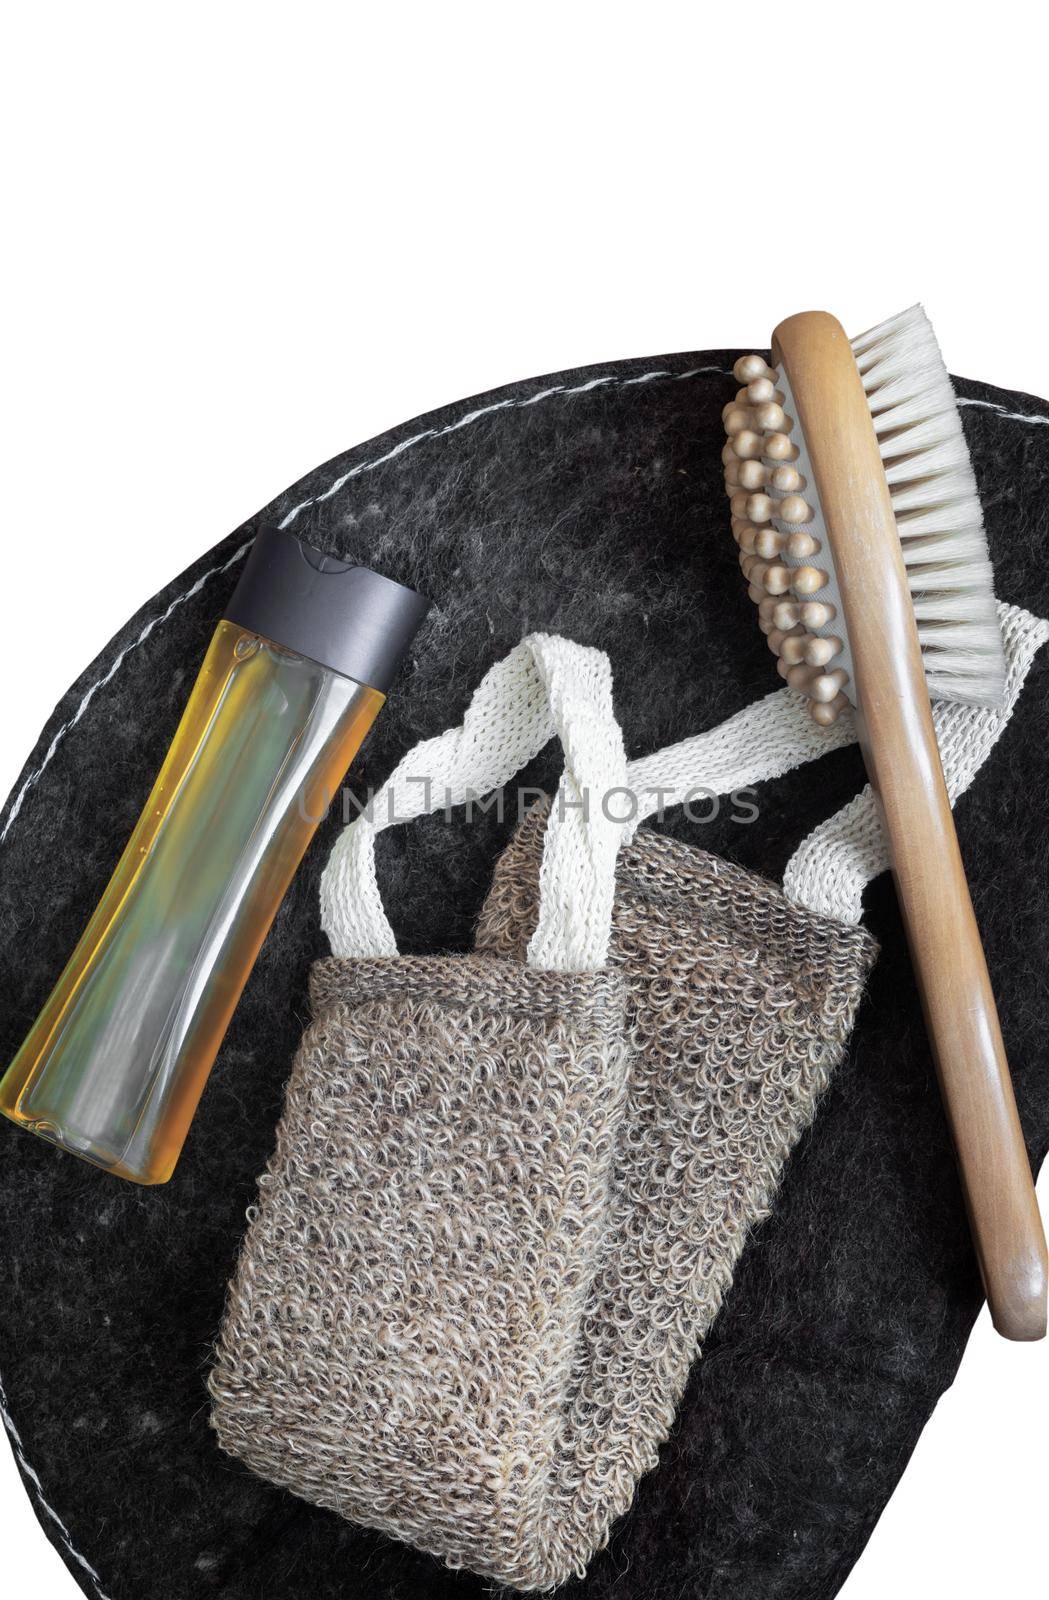 Accessories for visiting the bath or sauna: a washcloth, a mat, a massage brush and shower gel. Top view with copy space. Flat lay. Isolated on a white background